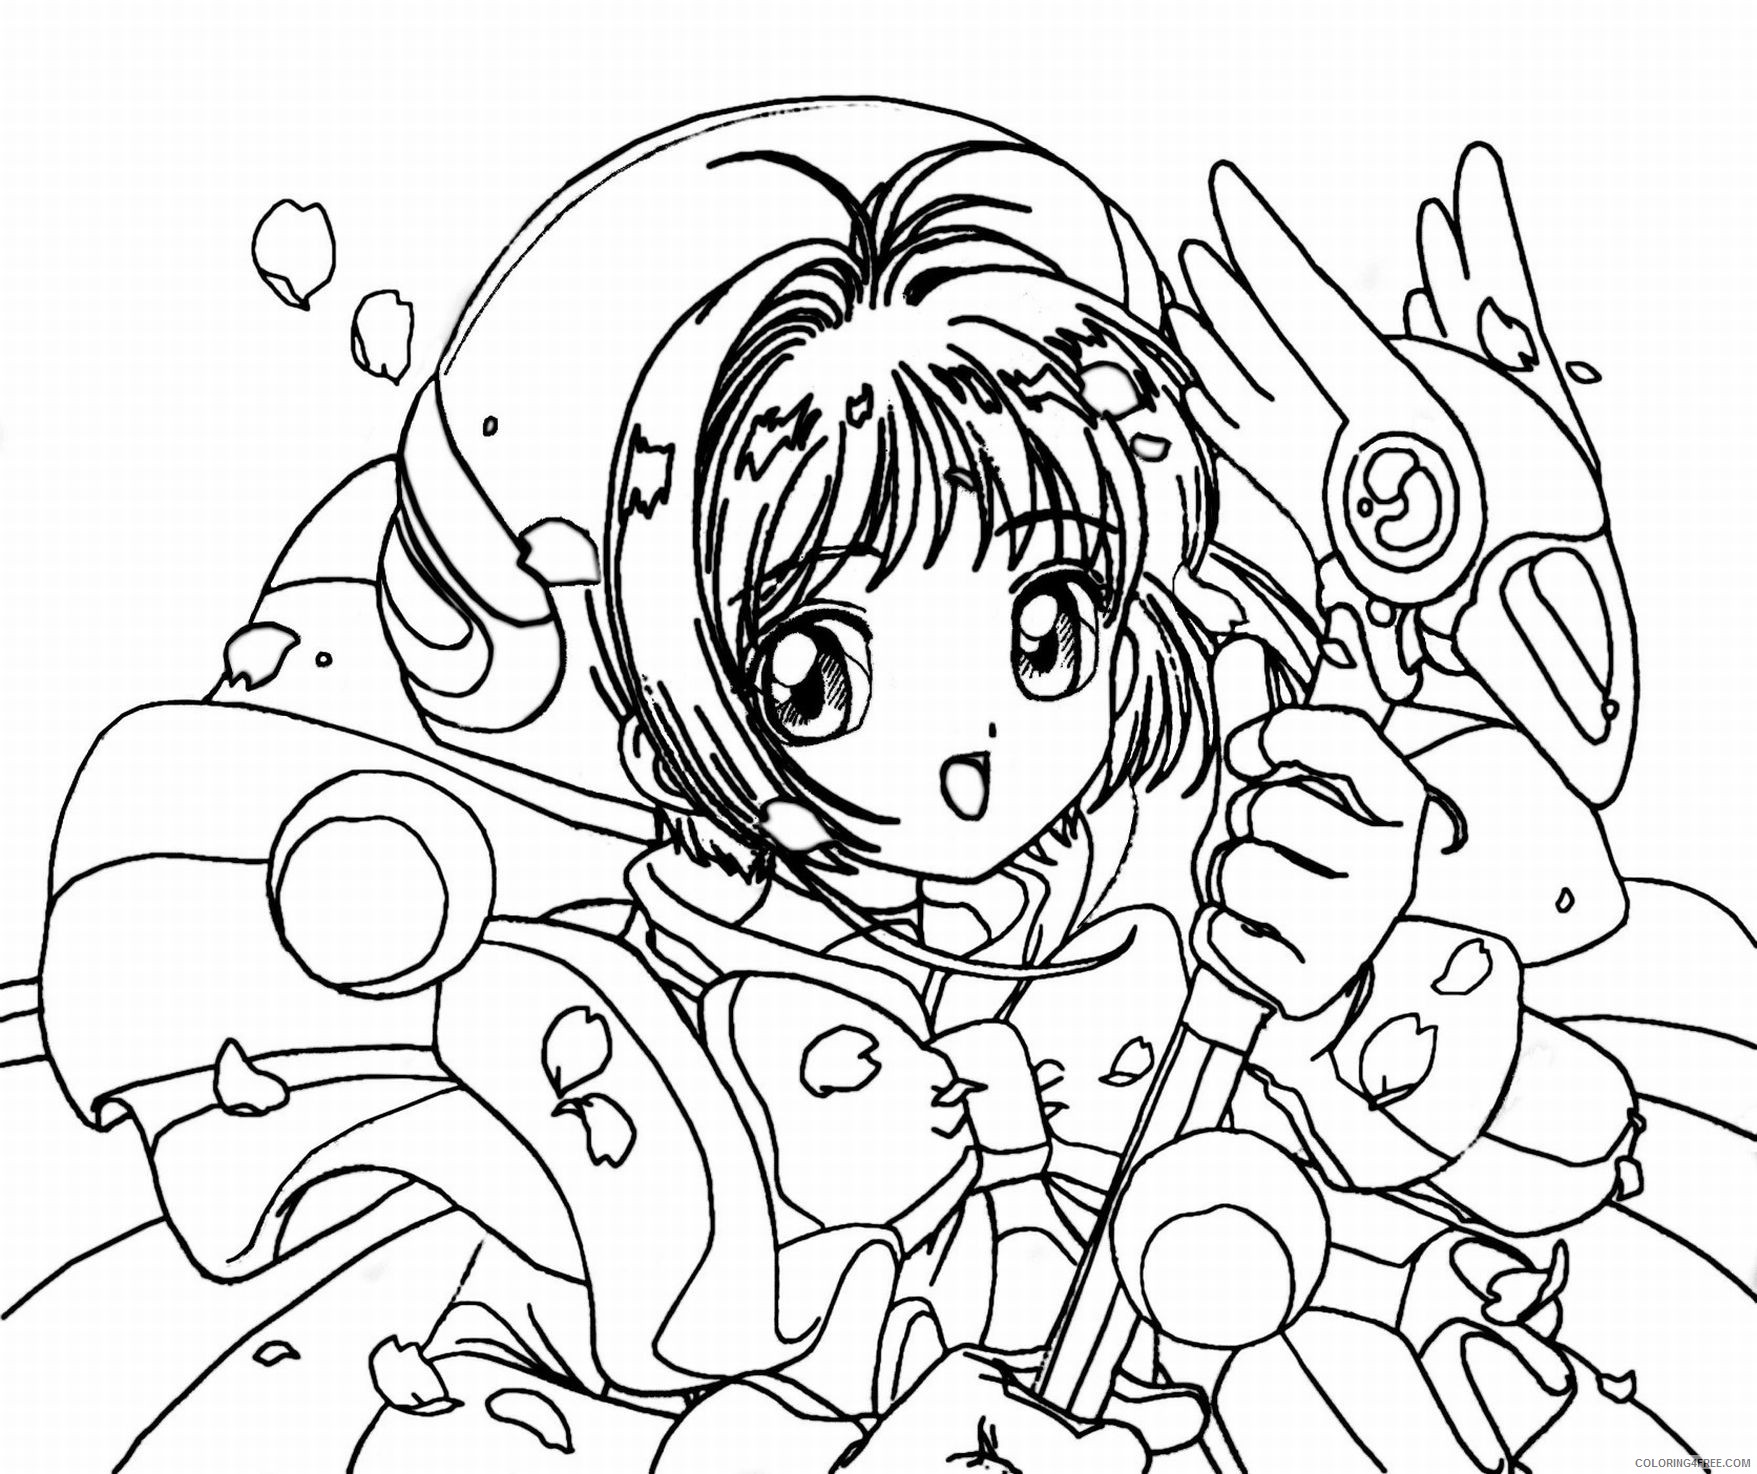 anime girl coloring pages with magic wand Coloring4free - Coloring4Free.com